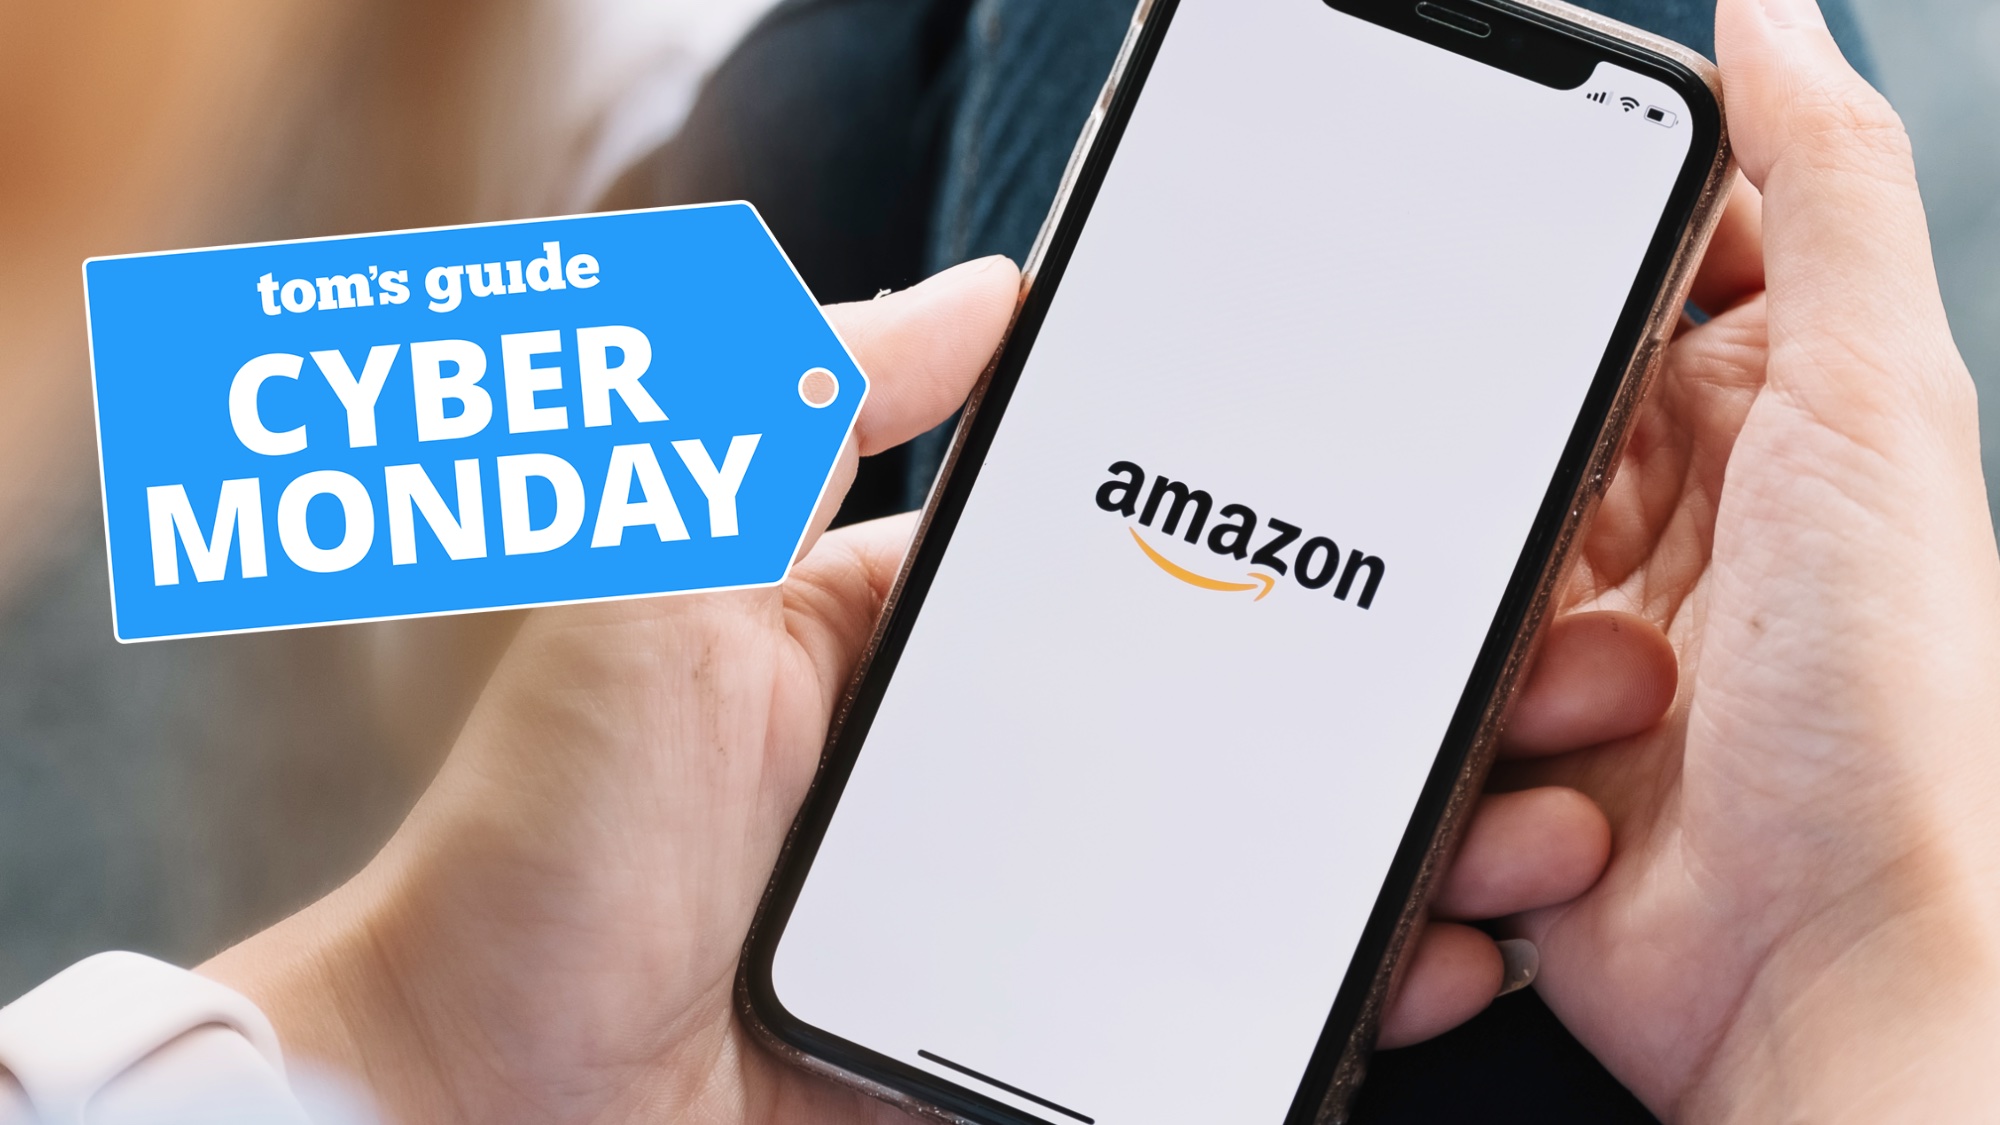 Amazon Cyber Monday deals are live — best sales right now Tom's Guide